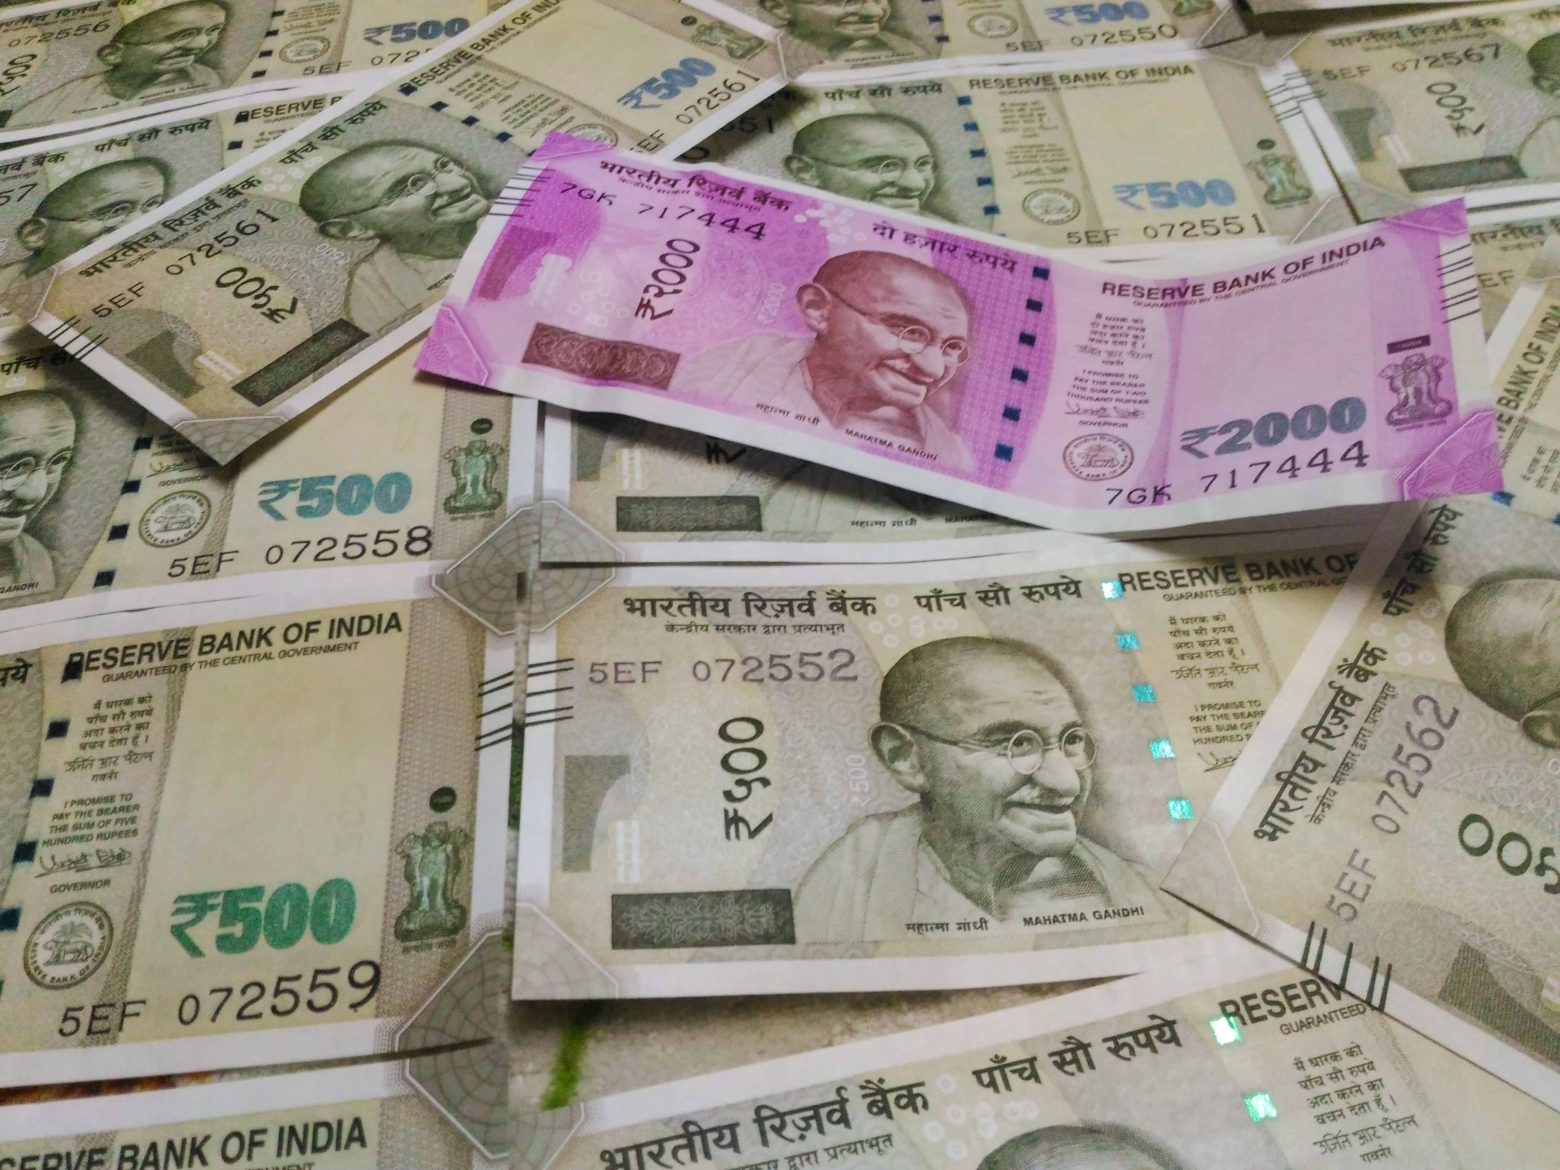 Rs 2000, Rs 500 notes, 1,000 notes, Indian government, Currency ban, Demonetisation, Indian currency, Note ban, Business news